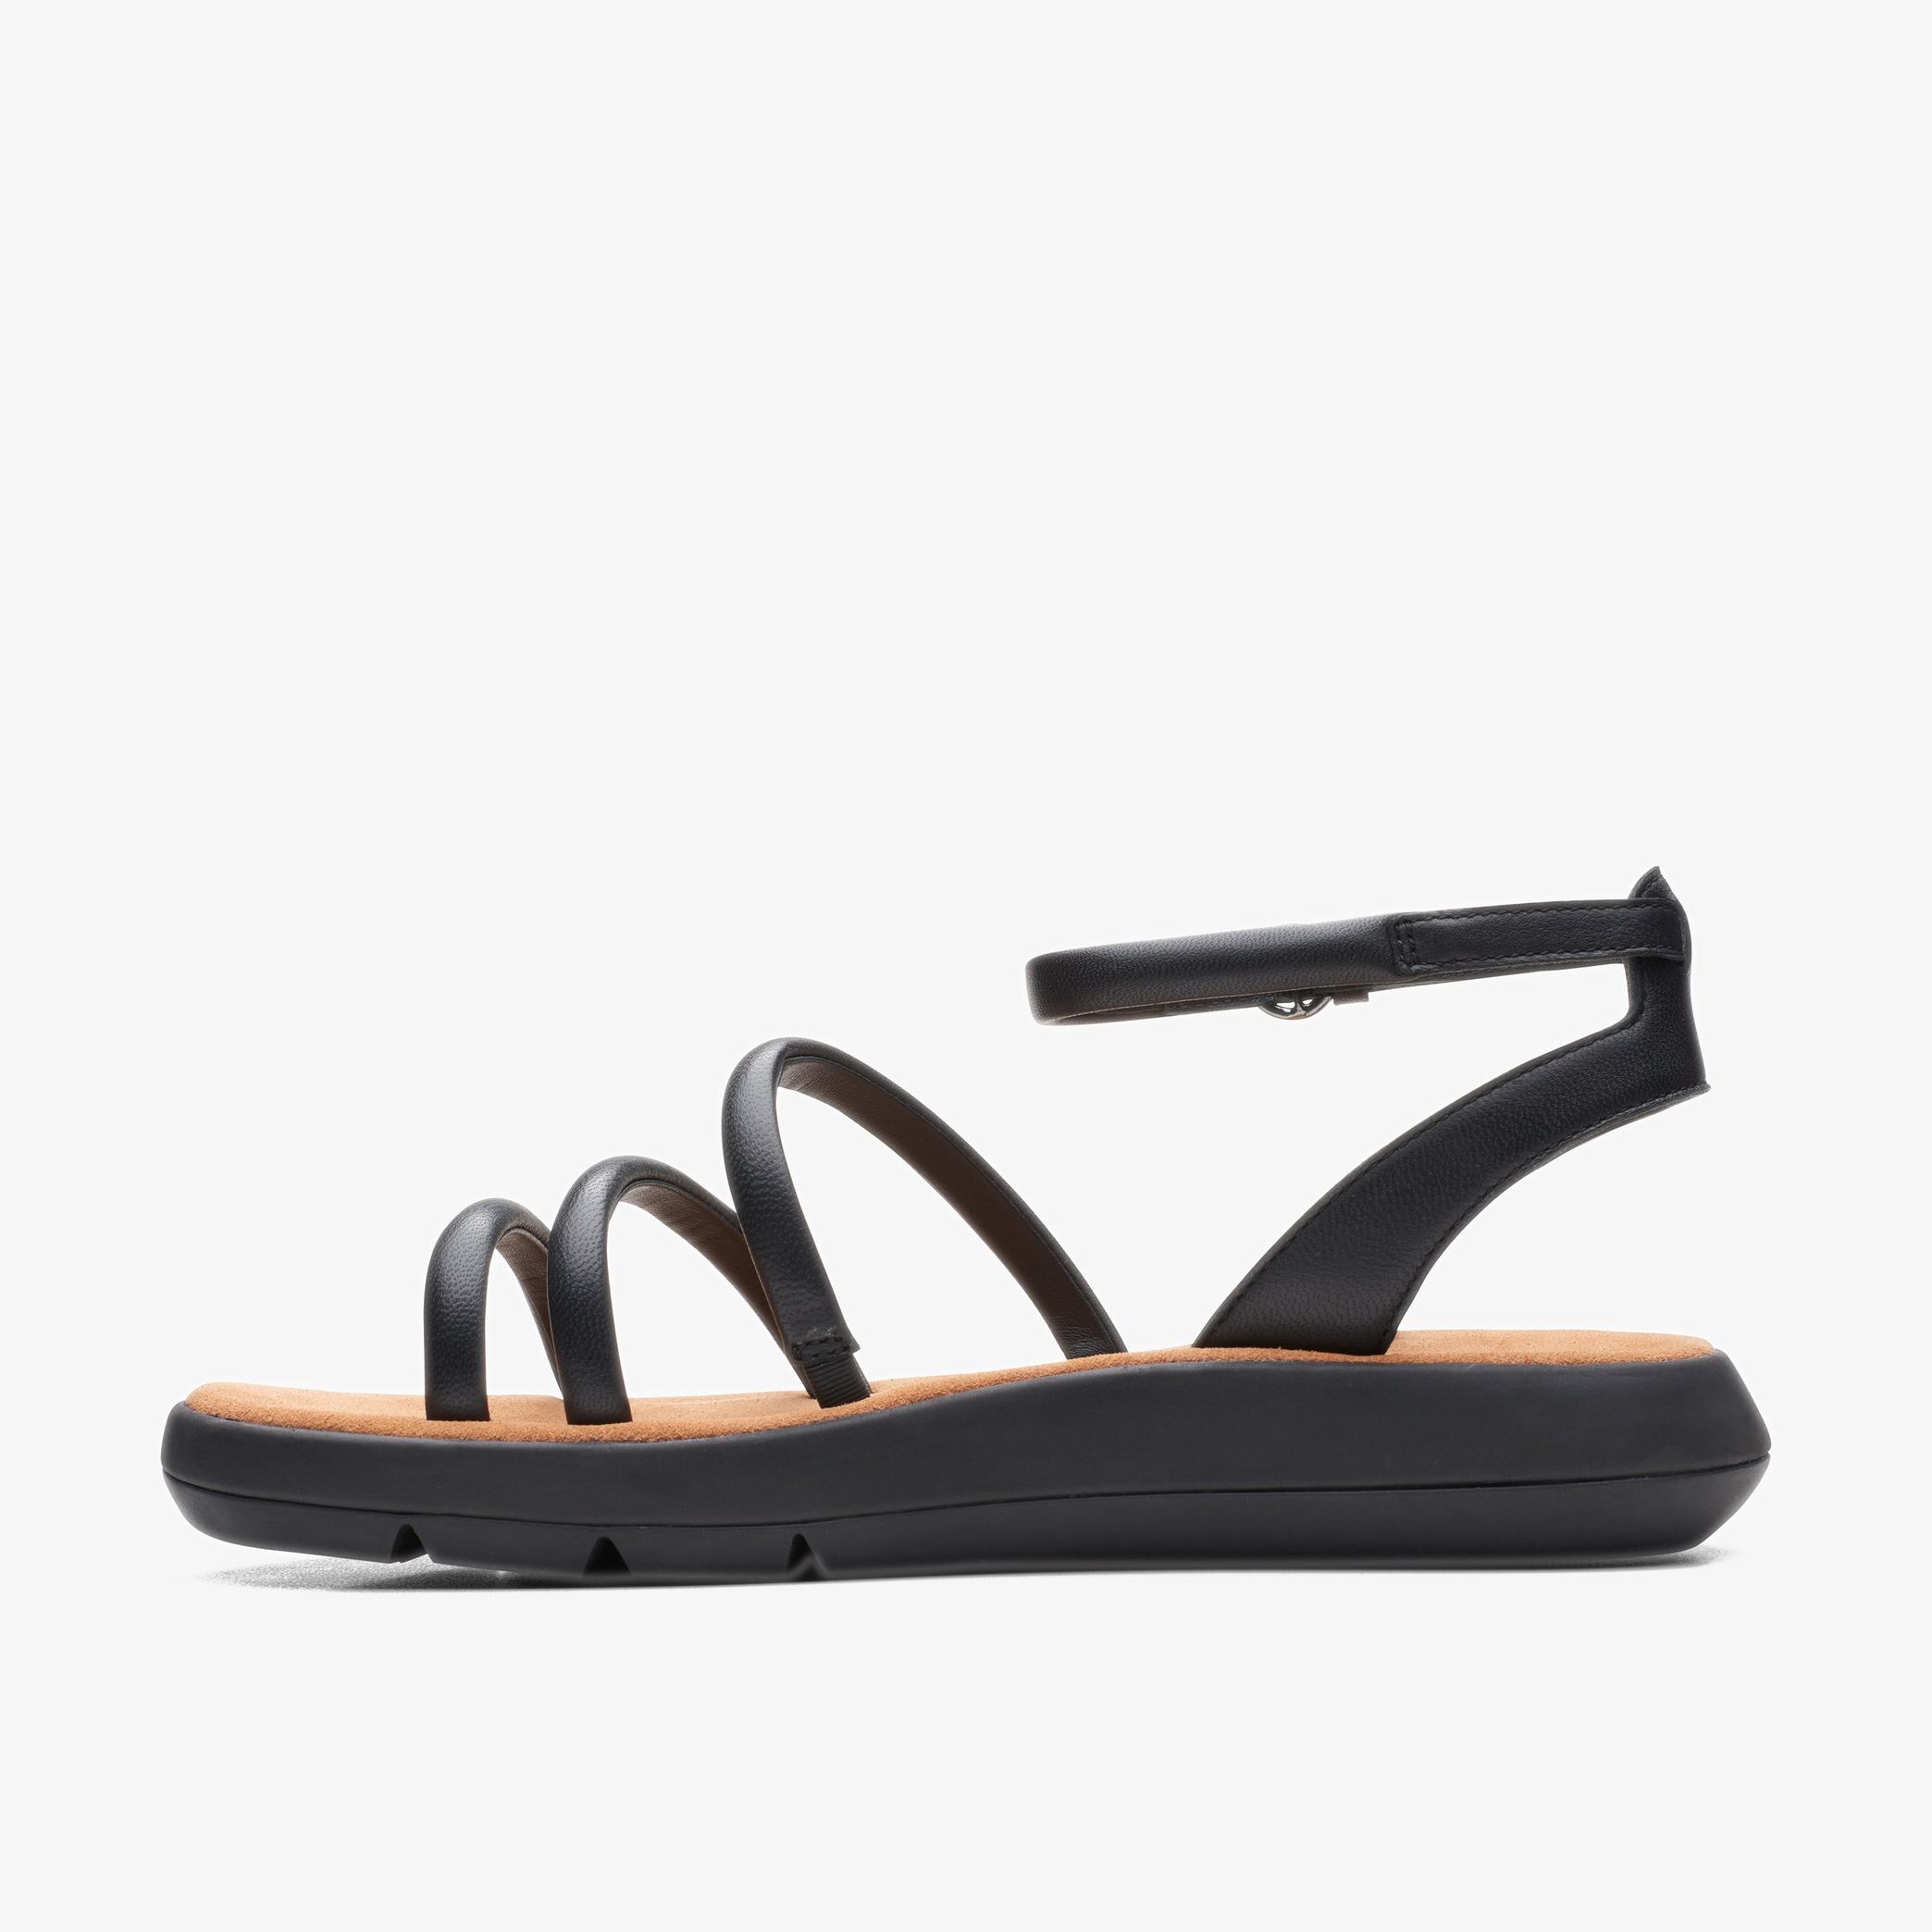 Jemsa Style Black Leather Flat Sandals, view 2 of 6